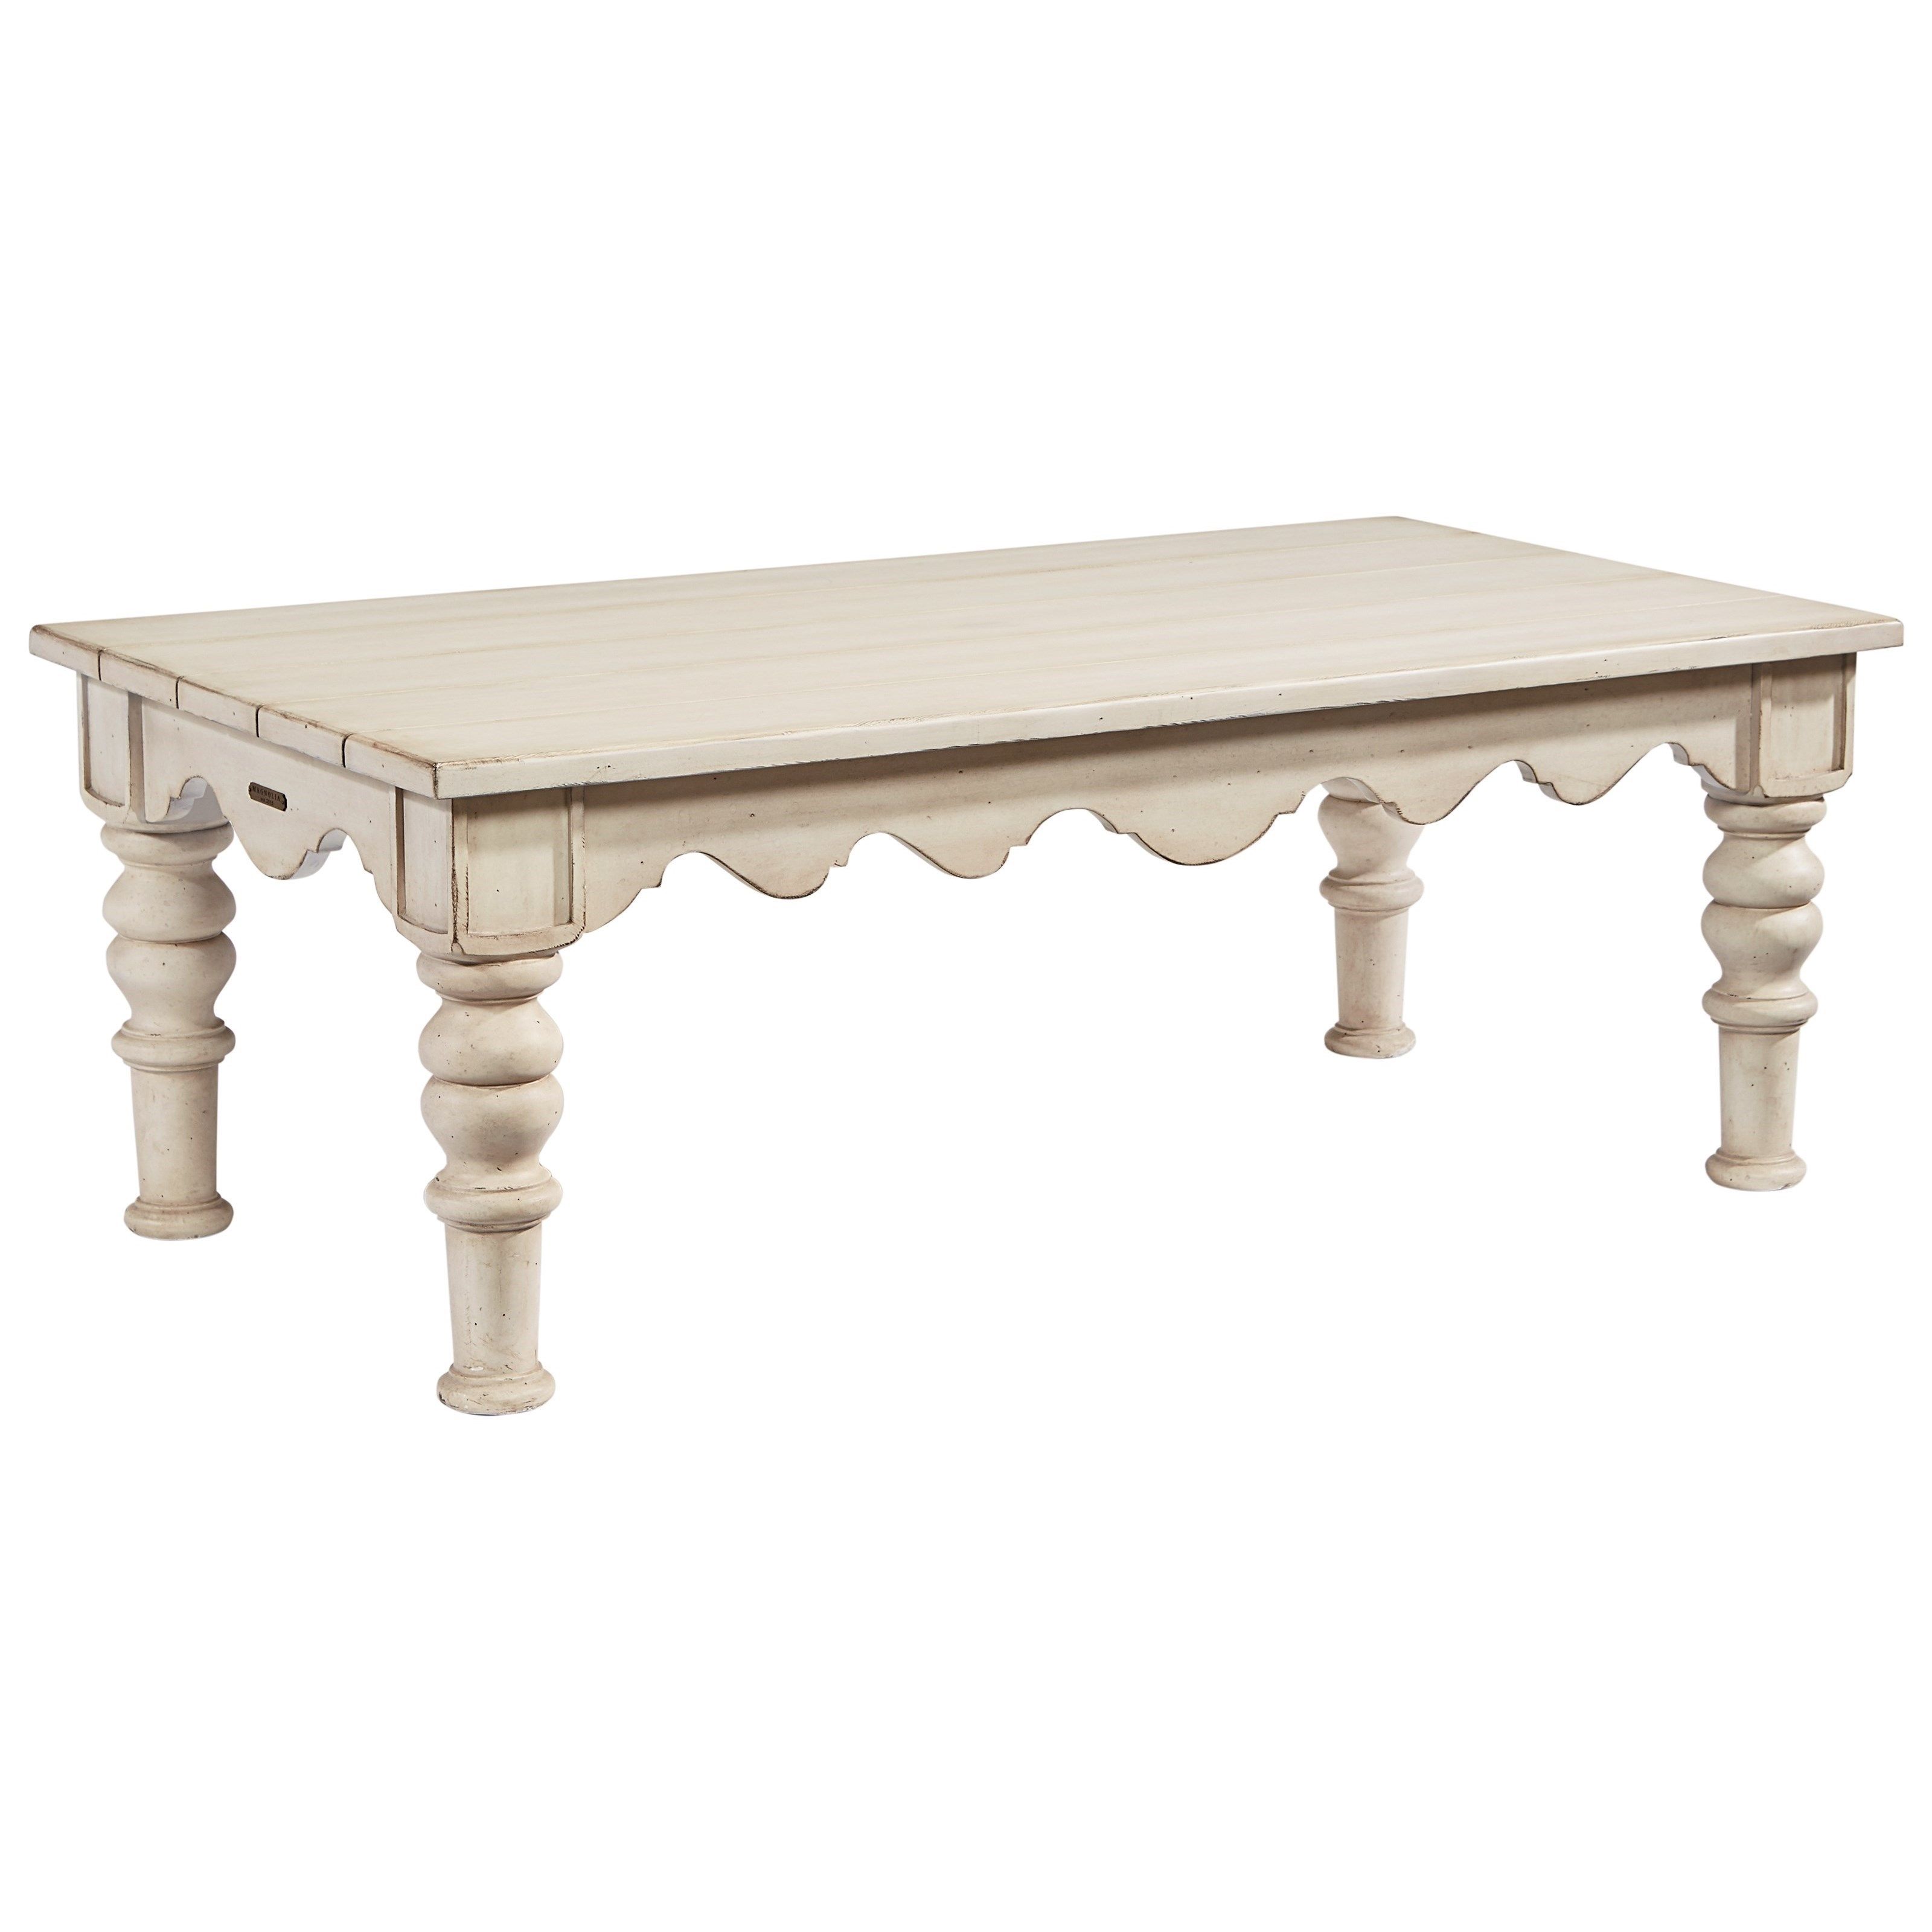 Magnolia Homejoanna Gaines Farmhouse Scalloped Coffee Table With Within Most Recently Released Magnolia Home Taper Turned Bench Gathering Tables With Zinc Top (View 8 of 20)